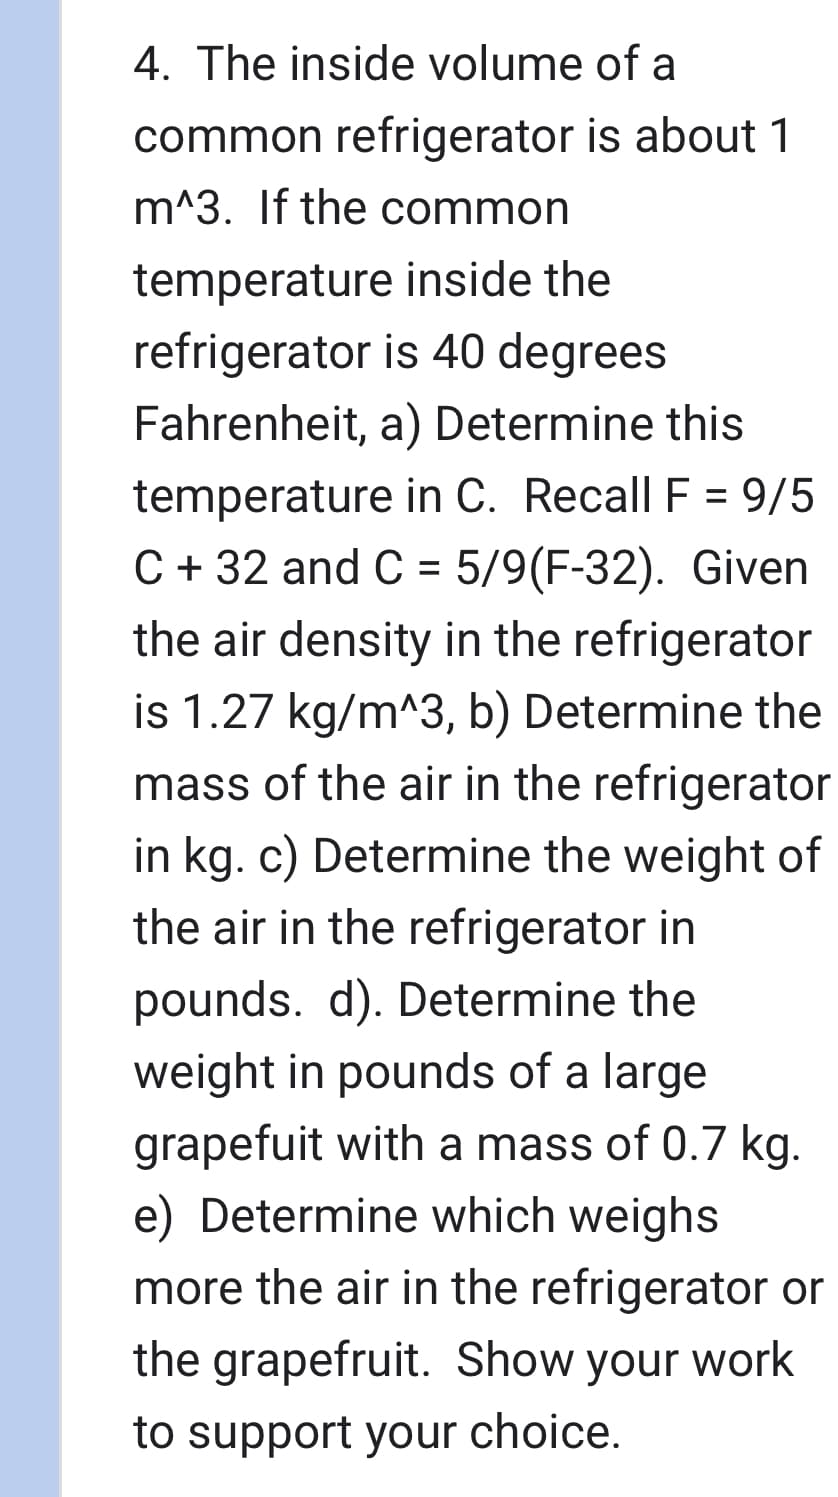 4. The inside volume of a
common refrigerator is about 1
m^3. If the common
temperature inside the
refrigerator is 40 degrees
Fahrenheit, a) Determine this
temperature in C. Recall F = 9/5
C+32 and C = 5/9 (F-32). Given
the air density in the refrigerator
is 1.27 kg/m^3, b) Determine the
mass of the air in the refrigerator
in kg. c) Determine the weight of
the air in the refrigerator in
pounds. d). Determine the
weight in pounds of a large
grapefuit with a mass of 0.7 kg.
e) Determine which weighs
more the air in the refrigerator or
the grapefruit. Show your work
to support your choice.